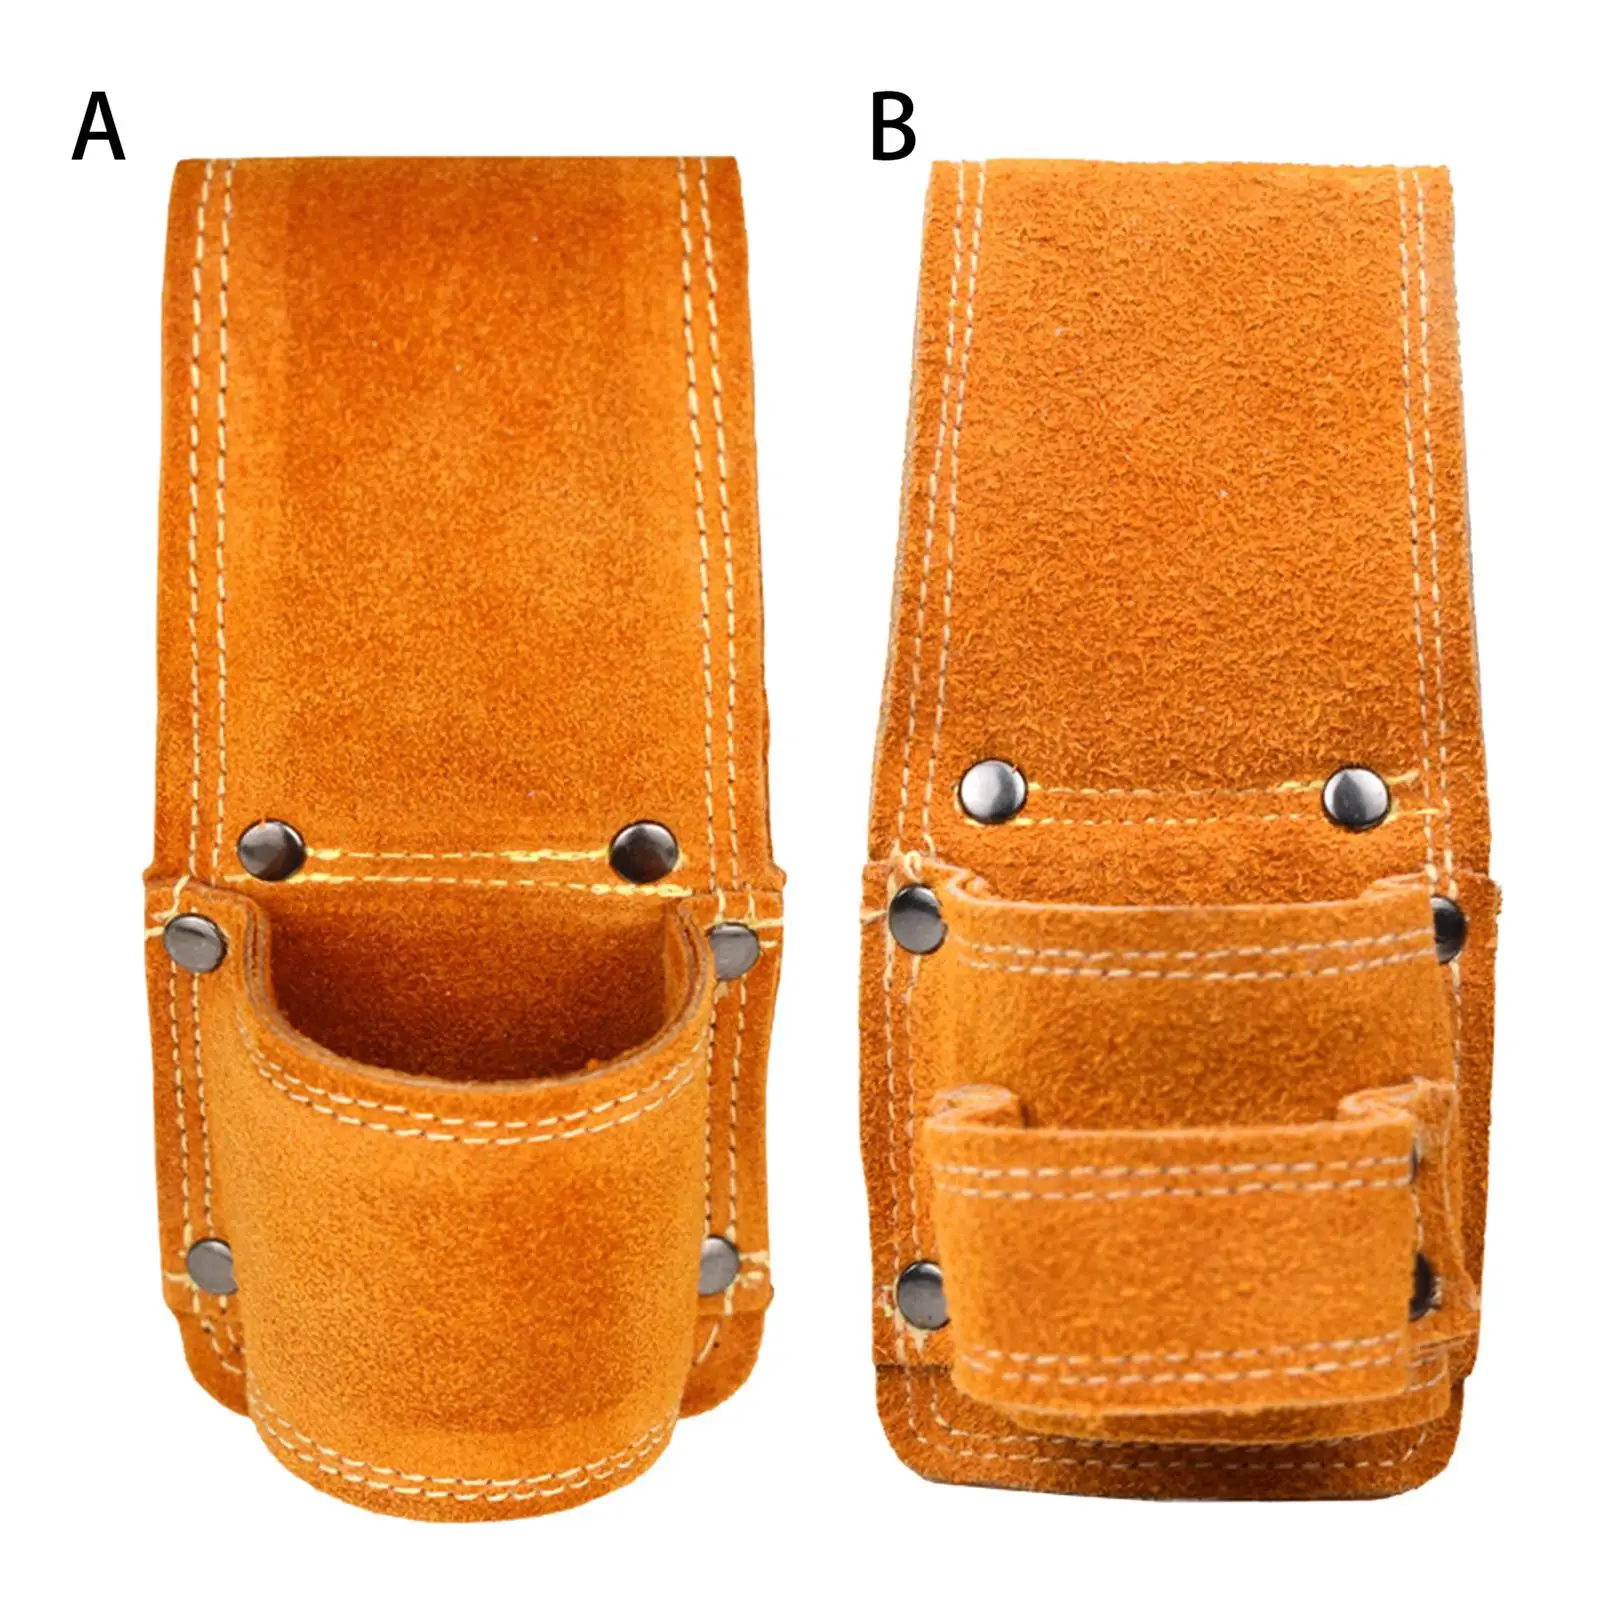 PU Leather Axe Holster Organizer Sheath Tool Belt Holster Tool for Wrench